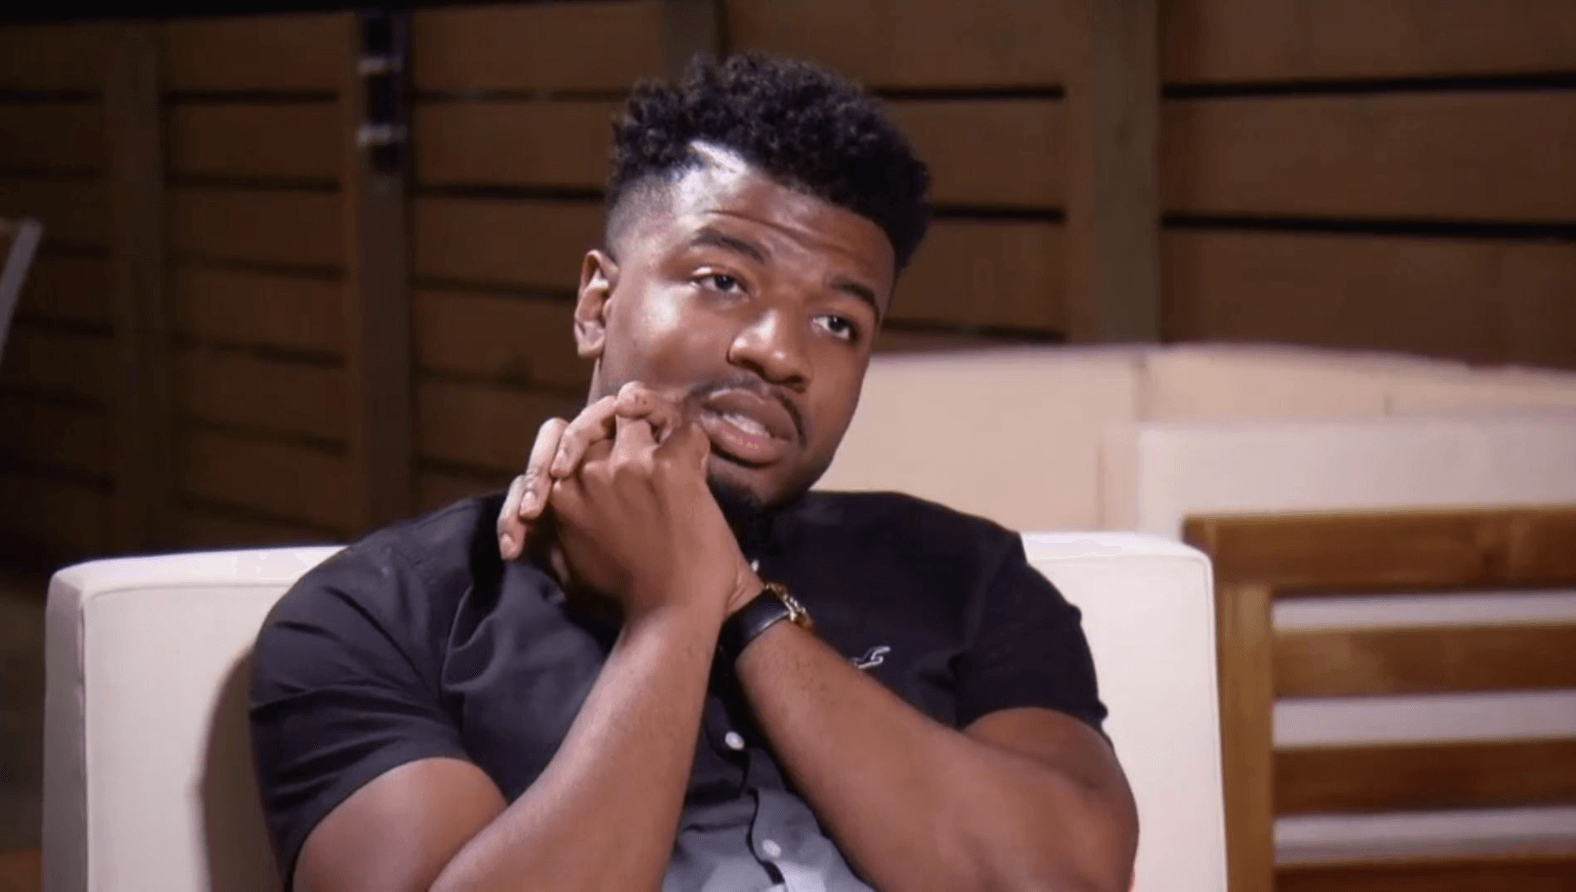 RECAP: ‘Married at First Sight’ Chris Williams’ Pastor Expose Him As An ‘Unstable’ Cheater!